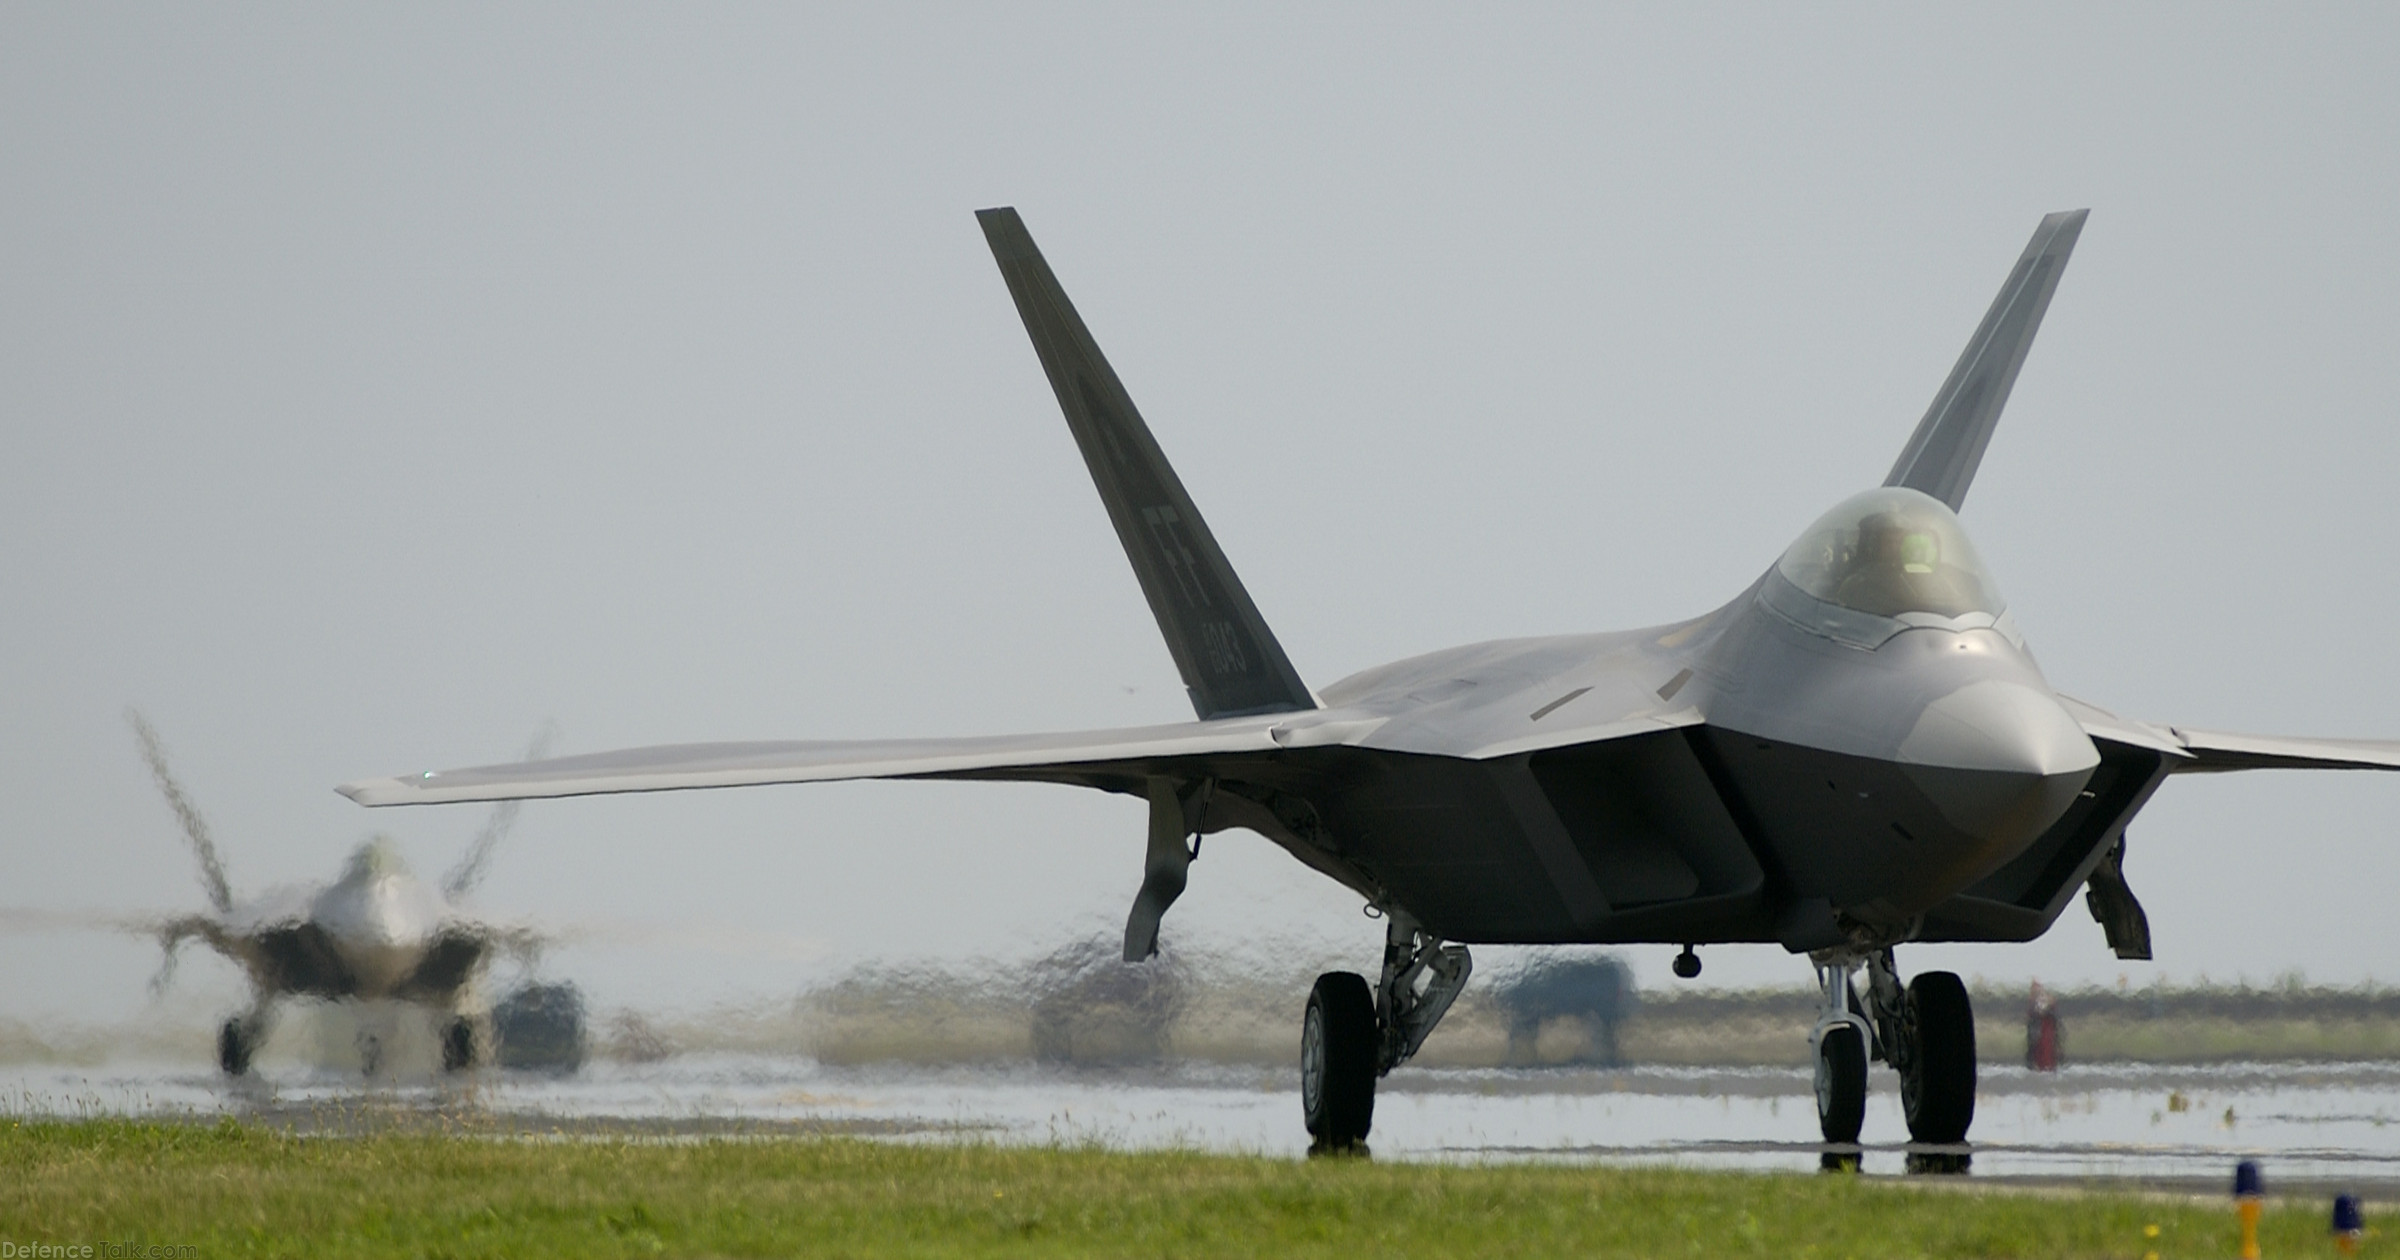 F-22 Raptor - Stealth Fighter Aircraft, US Air Force